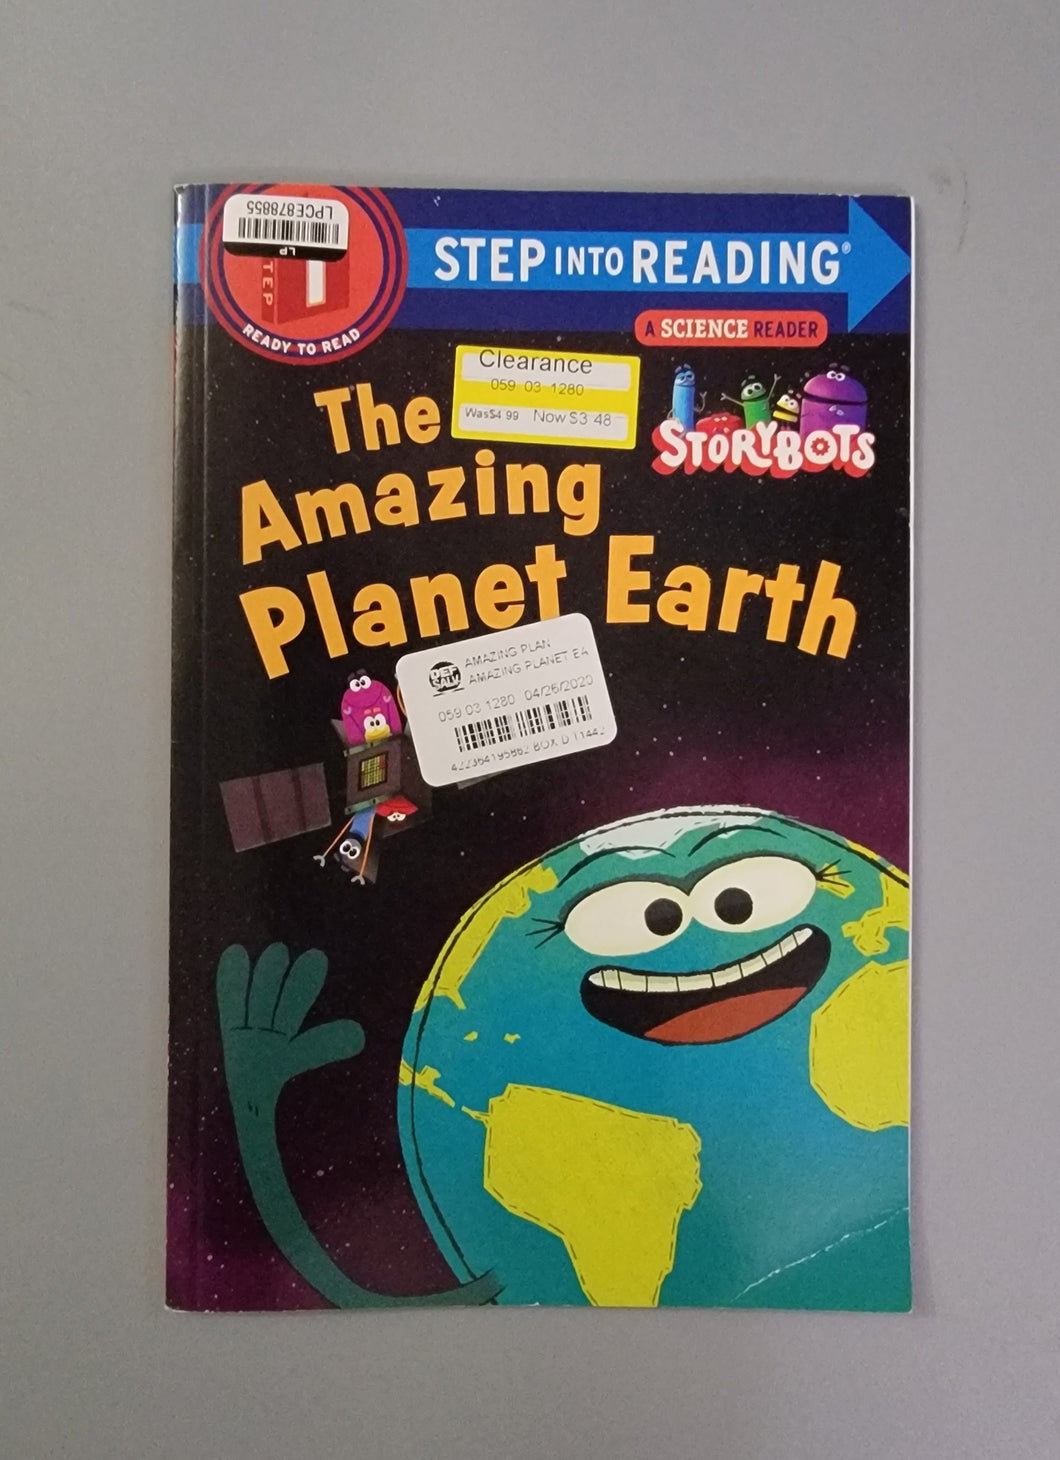 The Amazing Planet Earth (StoryBots) (Step into Reading) Paperback – Illustrated, September 5, 2017